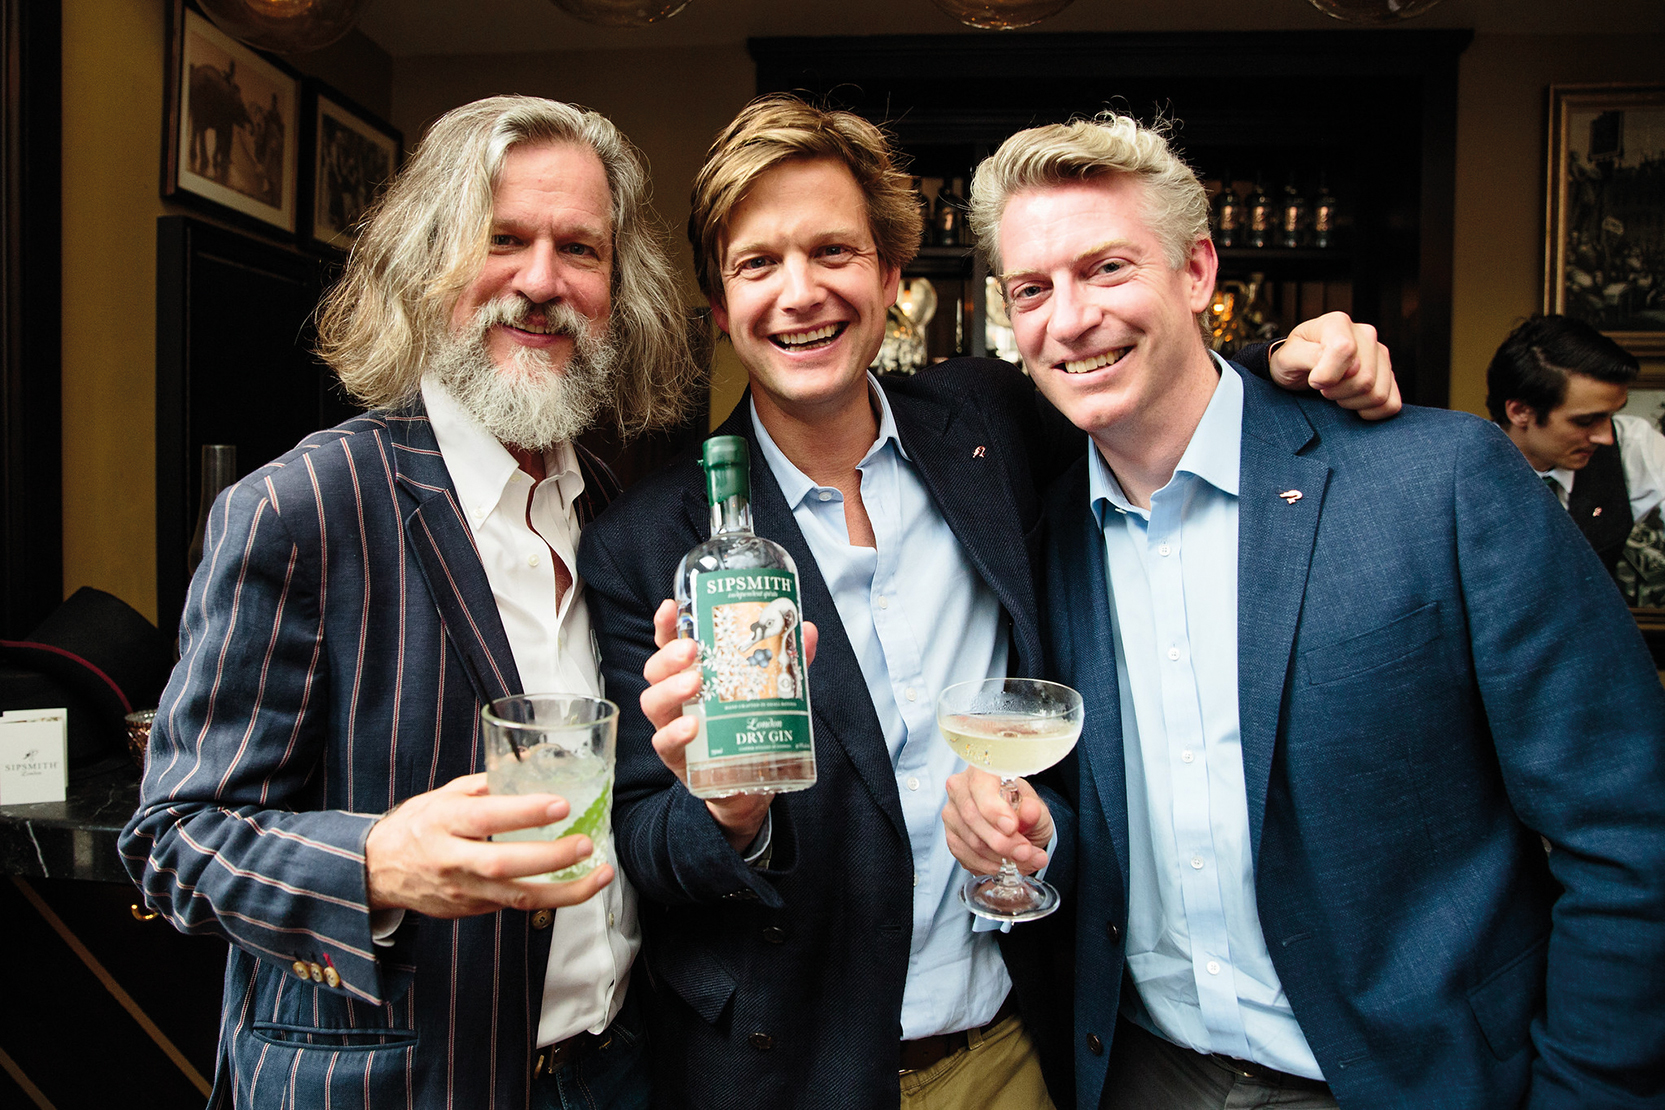 Jared Brown, Sam Galsworthy and Fairfax Hall, the founders of Sipsmith Gin